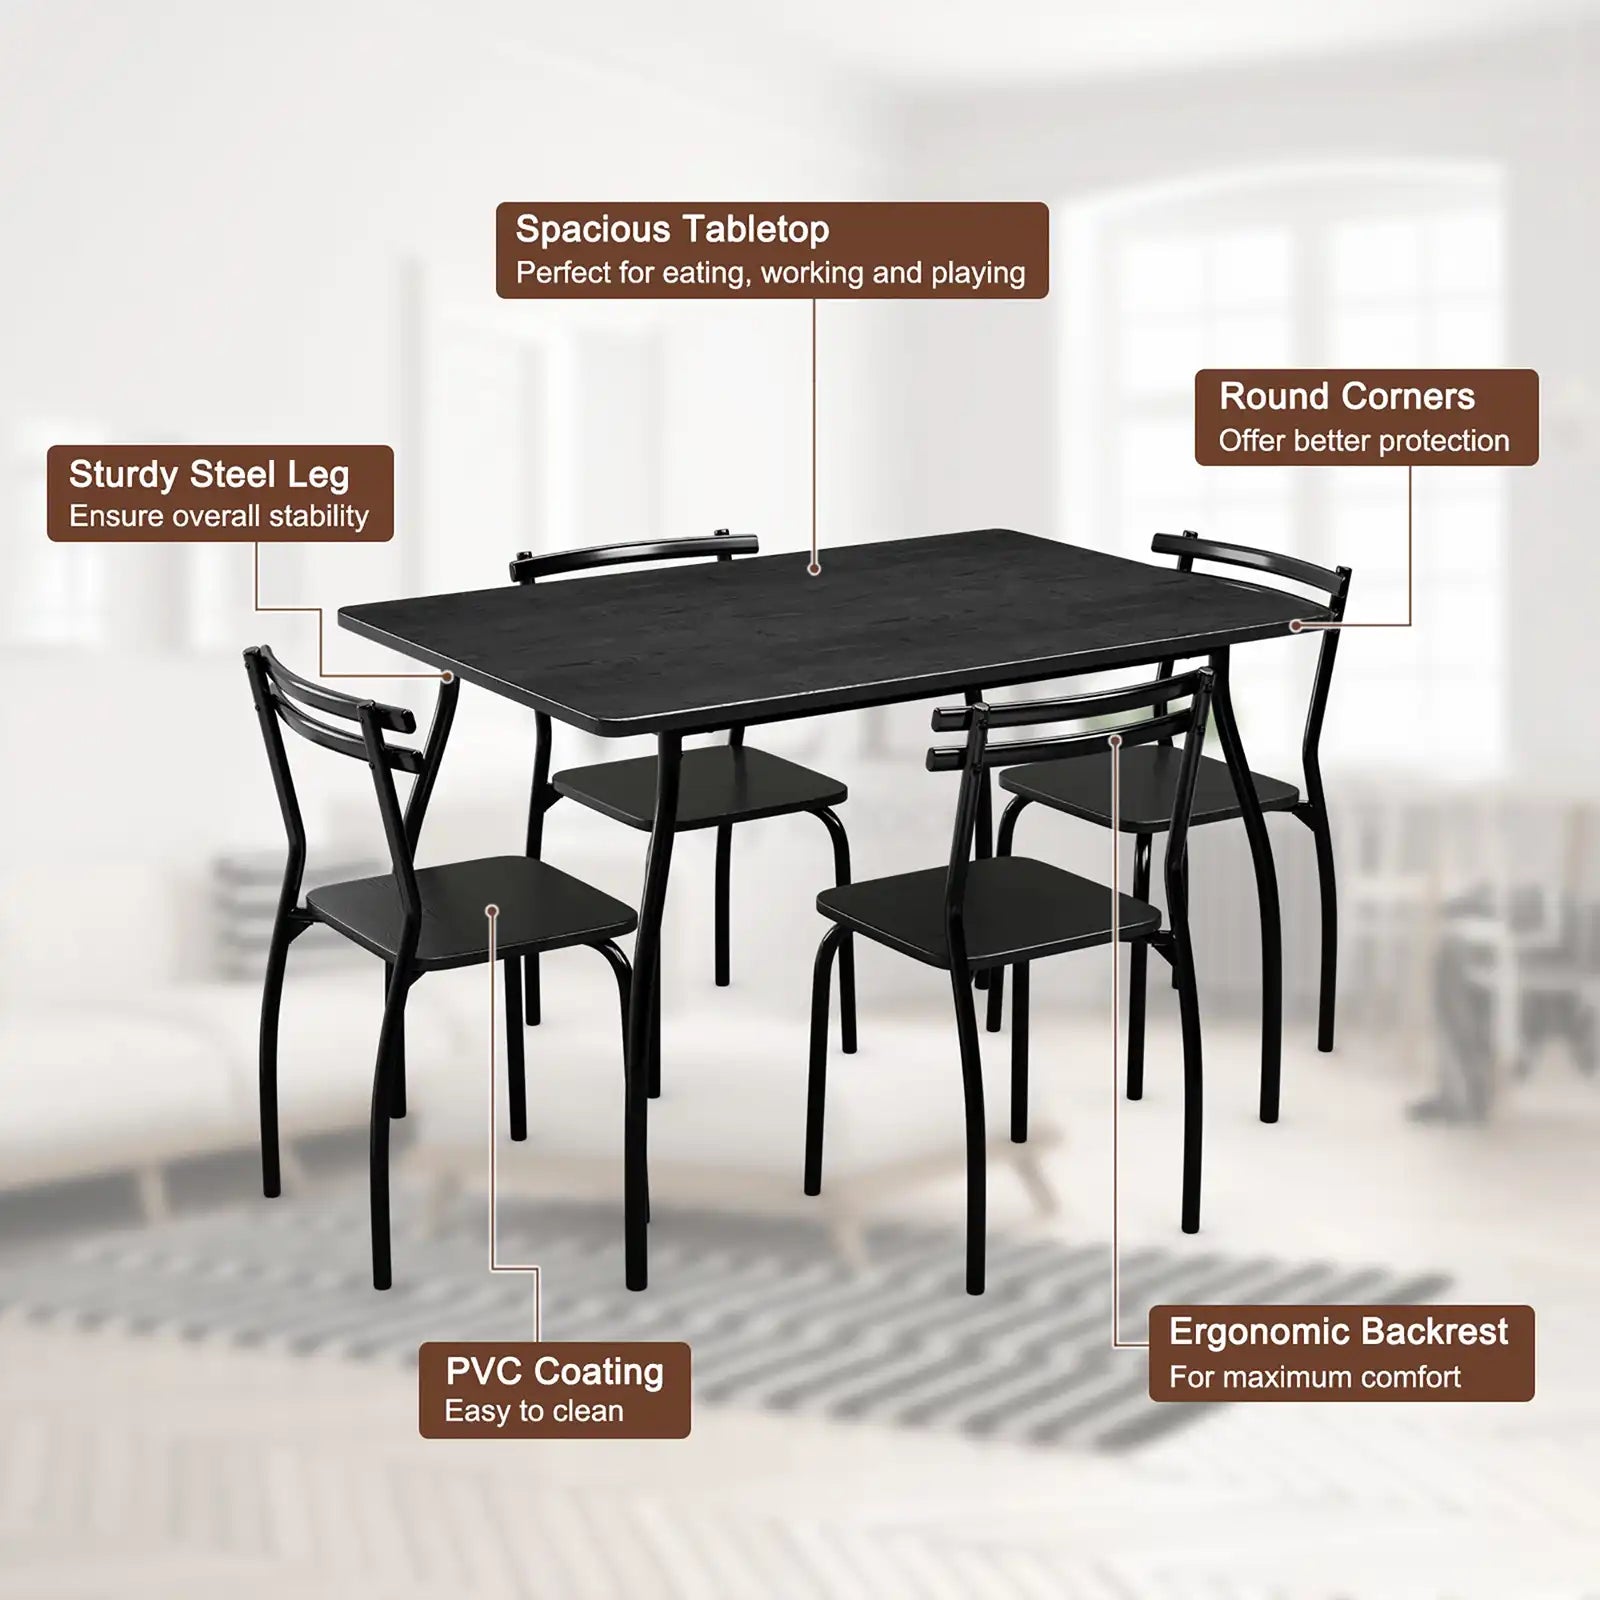 Table And 4 Chairs Dining Set